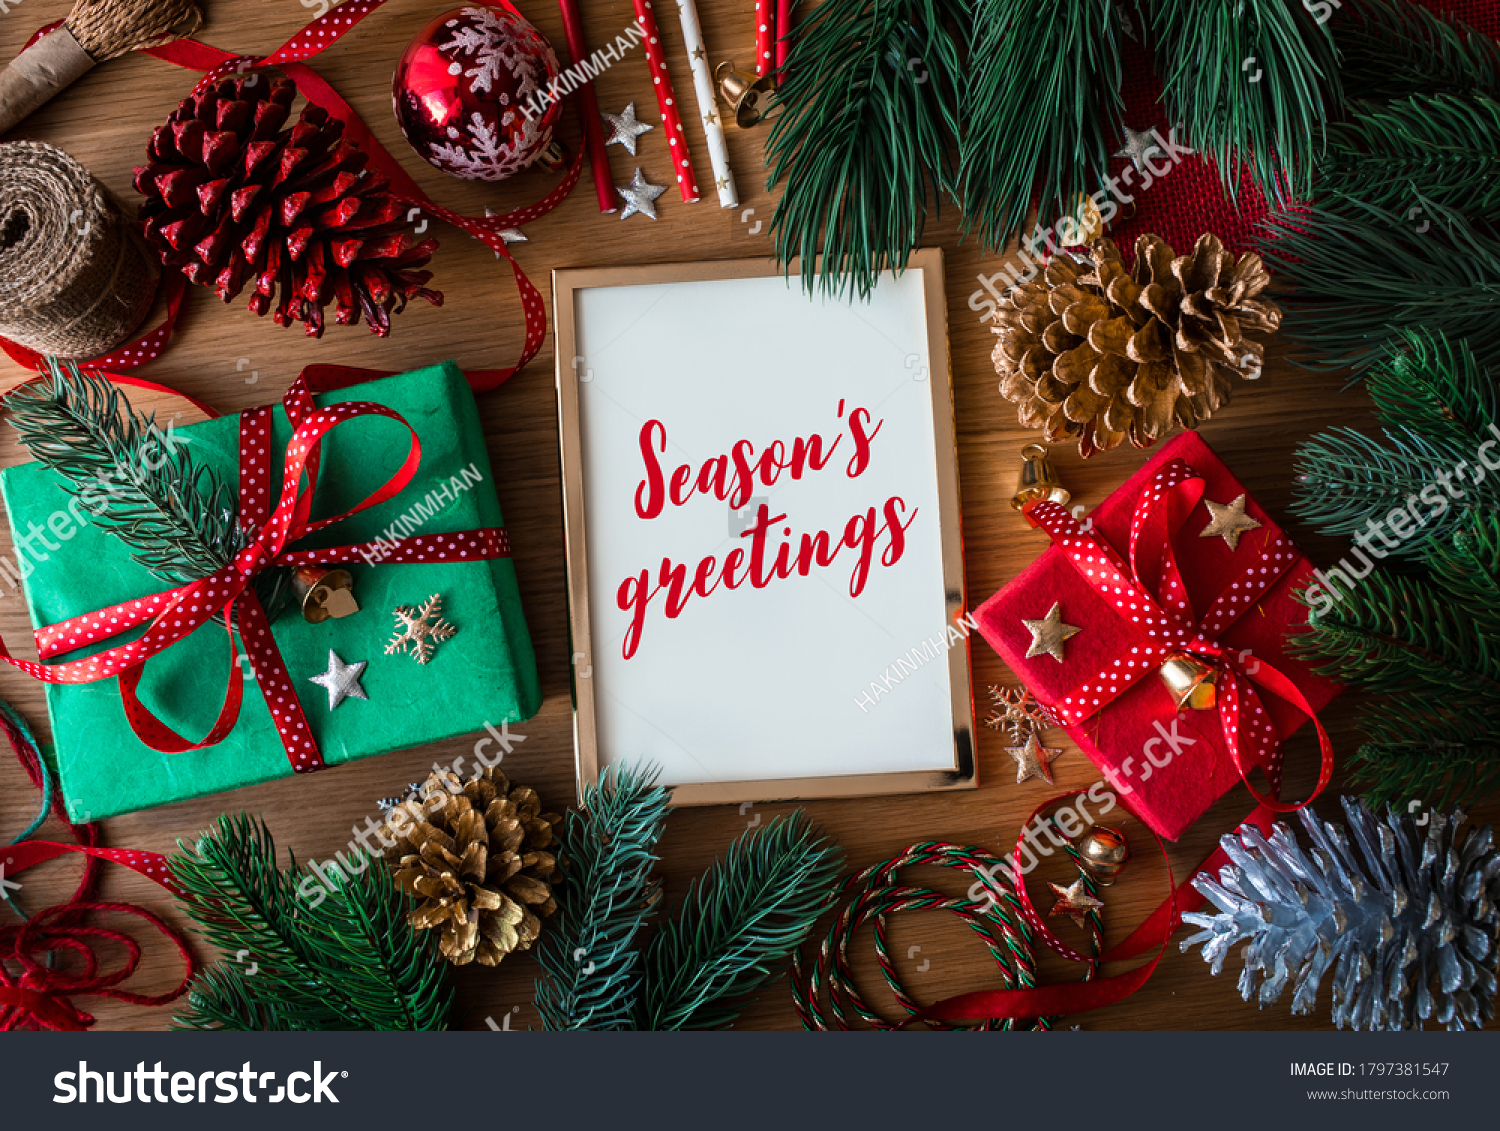 Season's greetings text on cards with gift box present and ornament element on wood table background.winter season activity ideas #1797381547